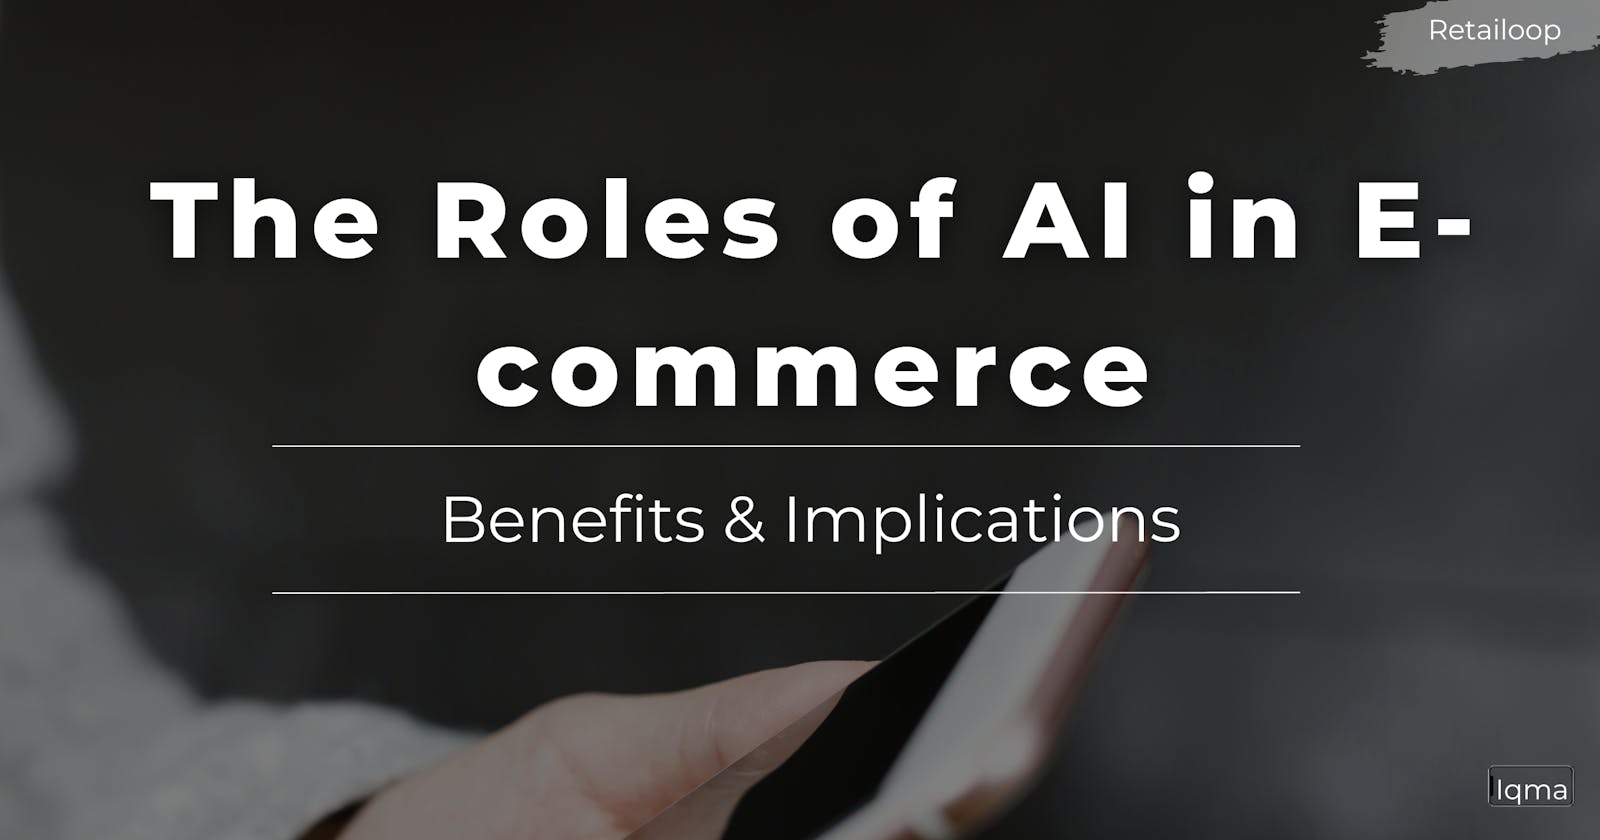 The Roles of AI in E-commerce